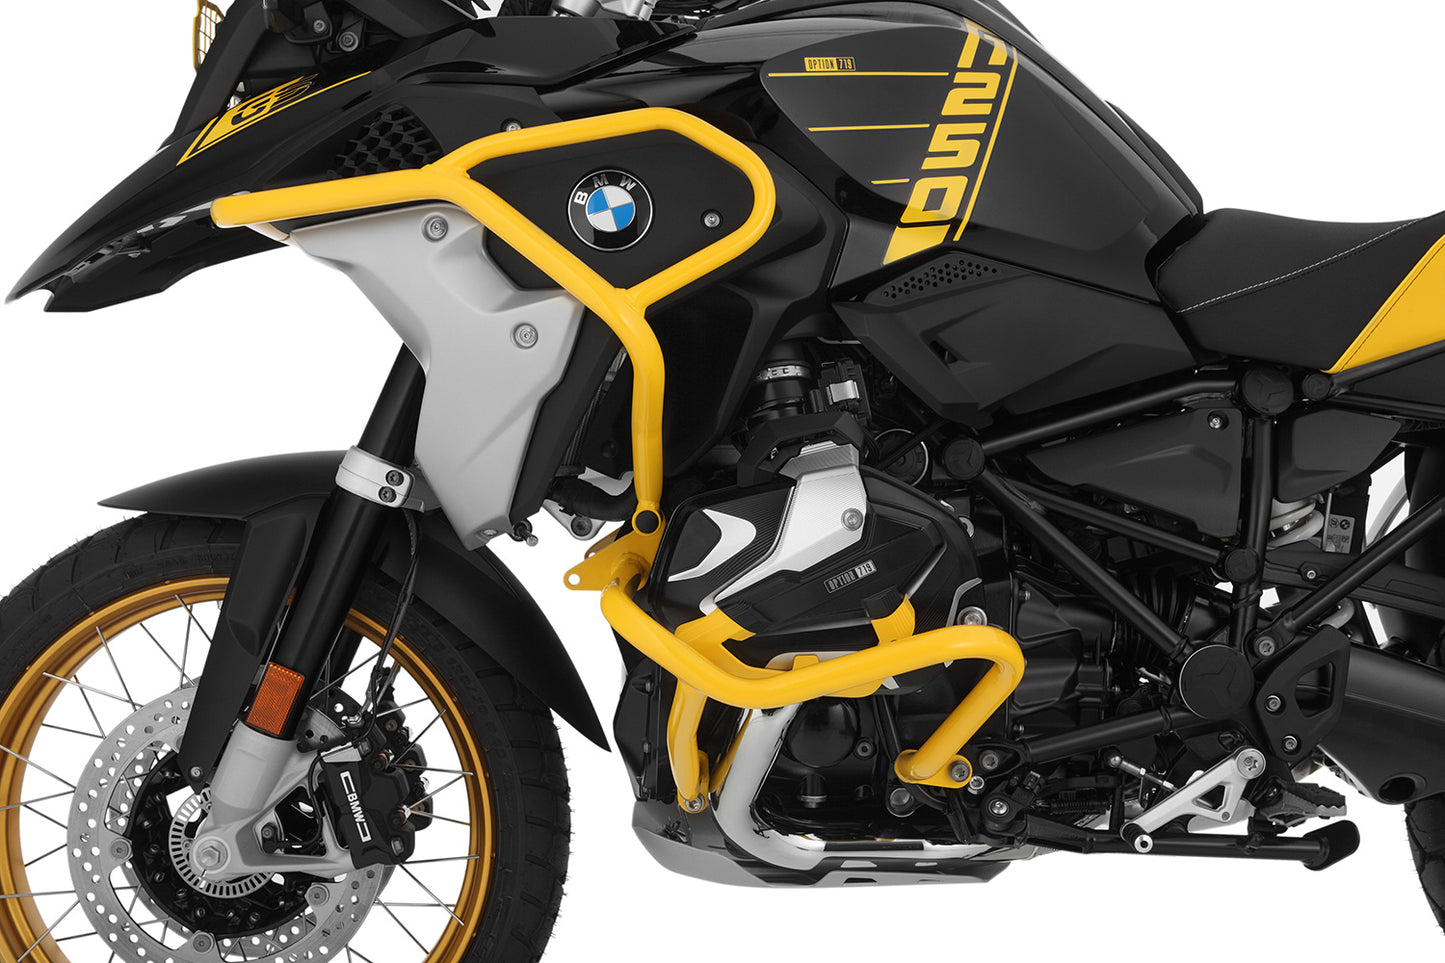 Wunderlich Engine protection bar VA - yellow | Edition 40 Years GS